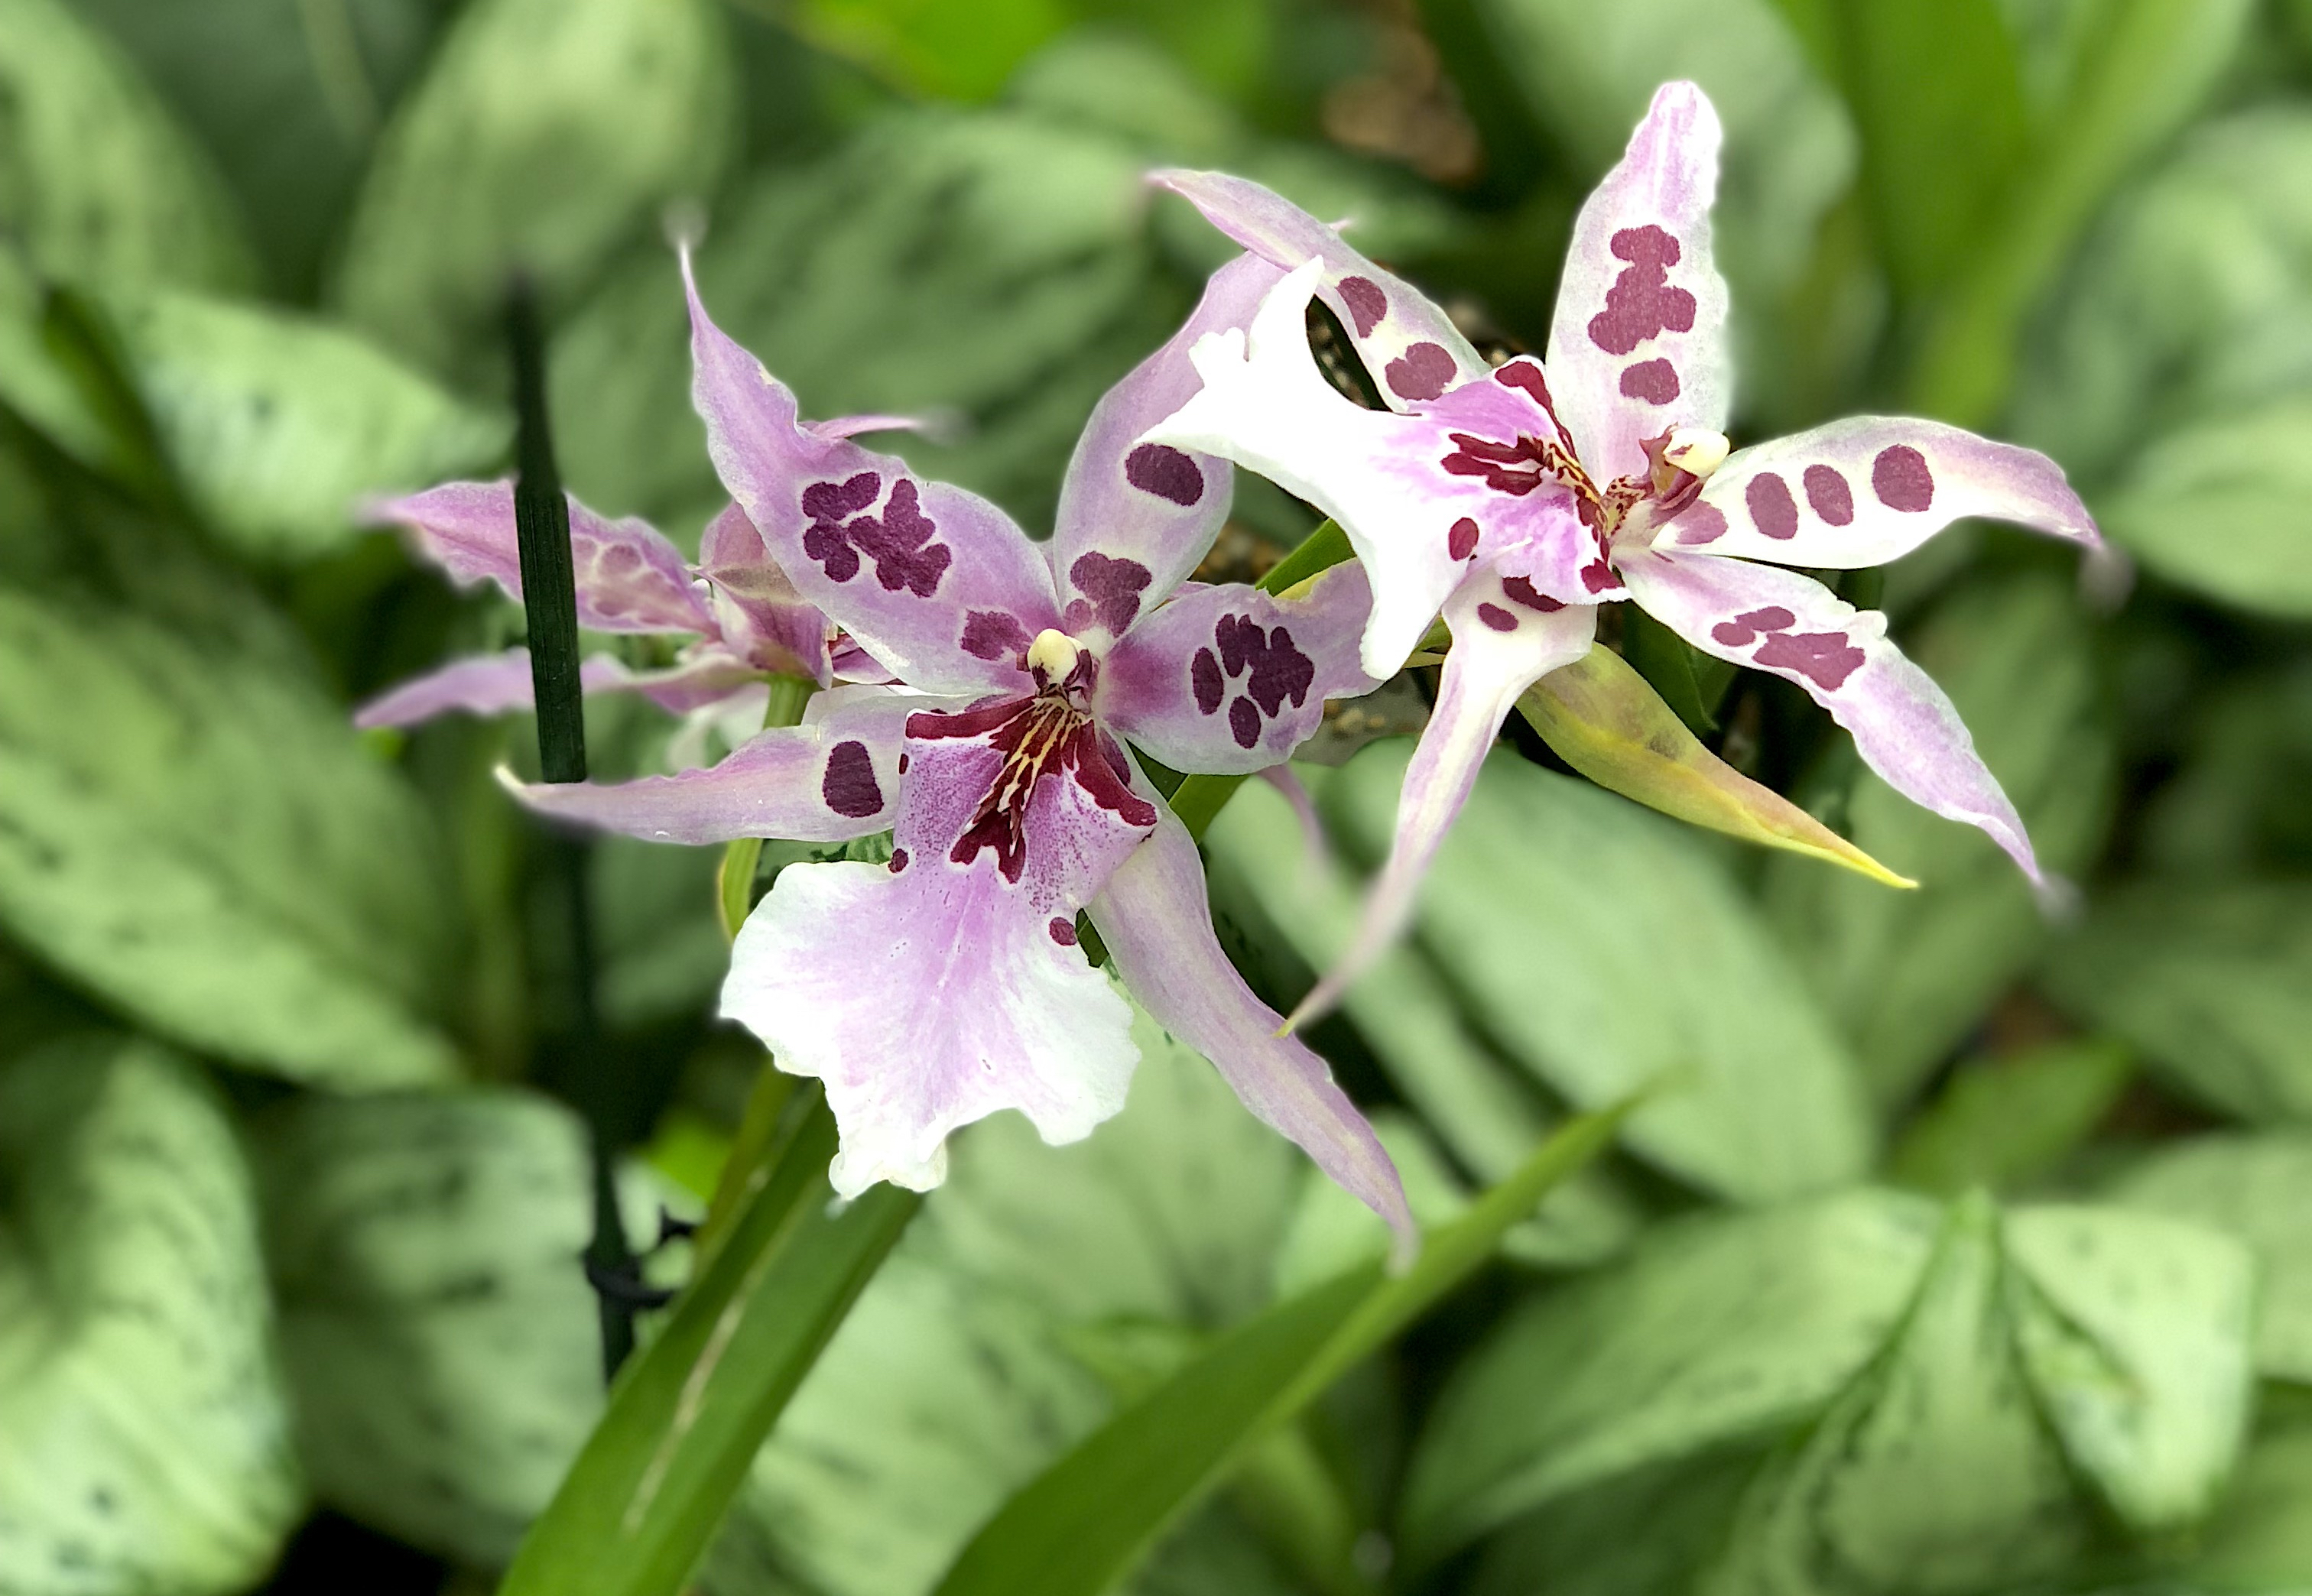 Plant trends 2023 - Orchids